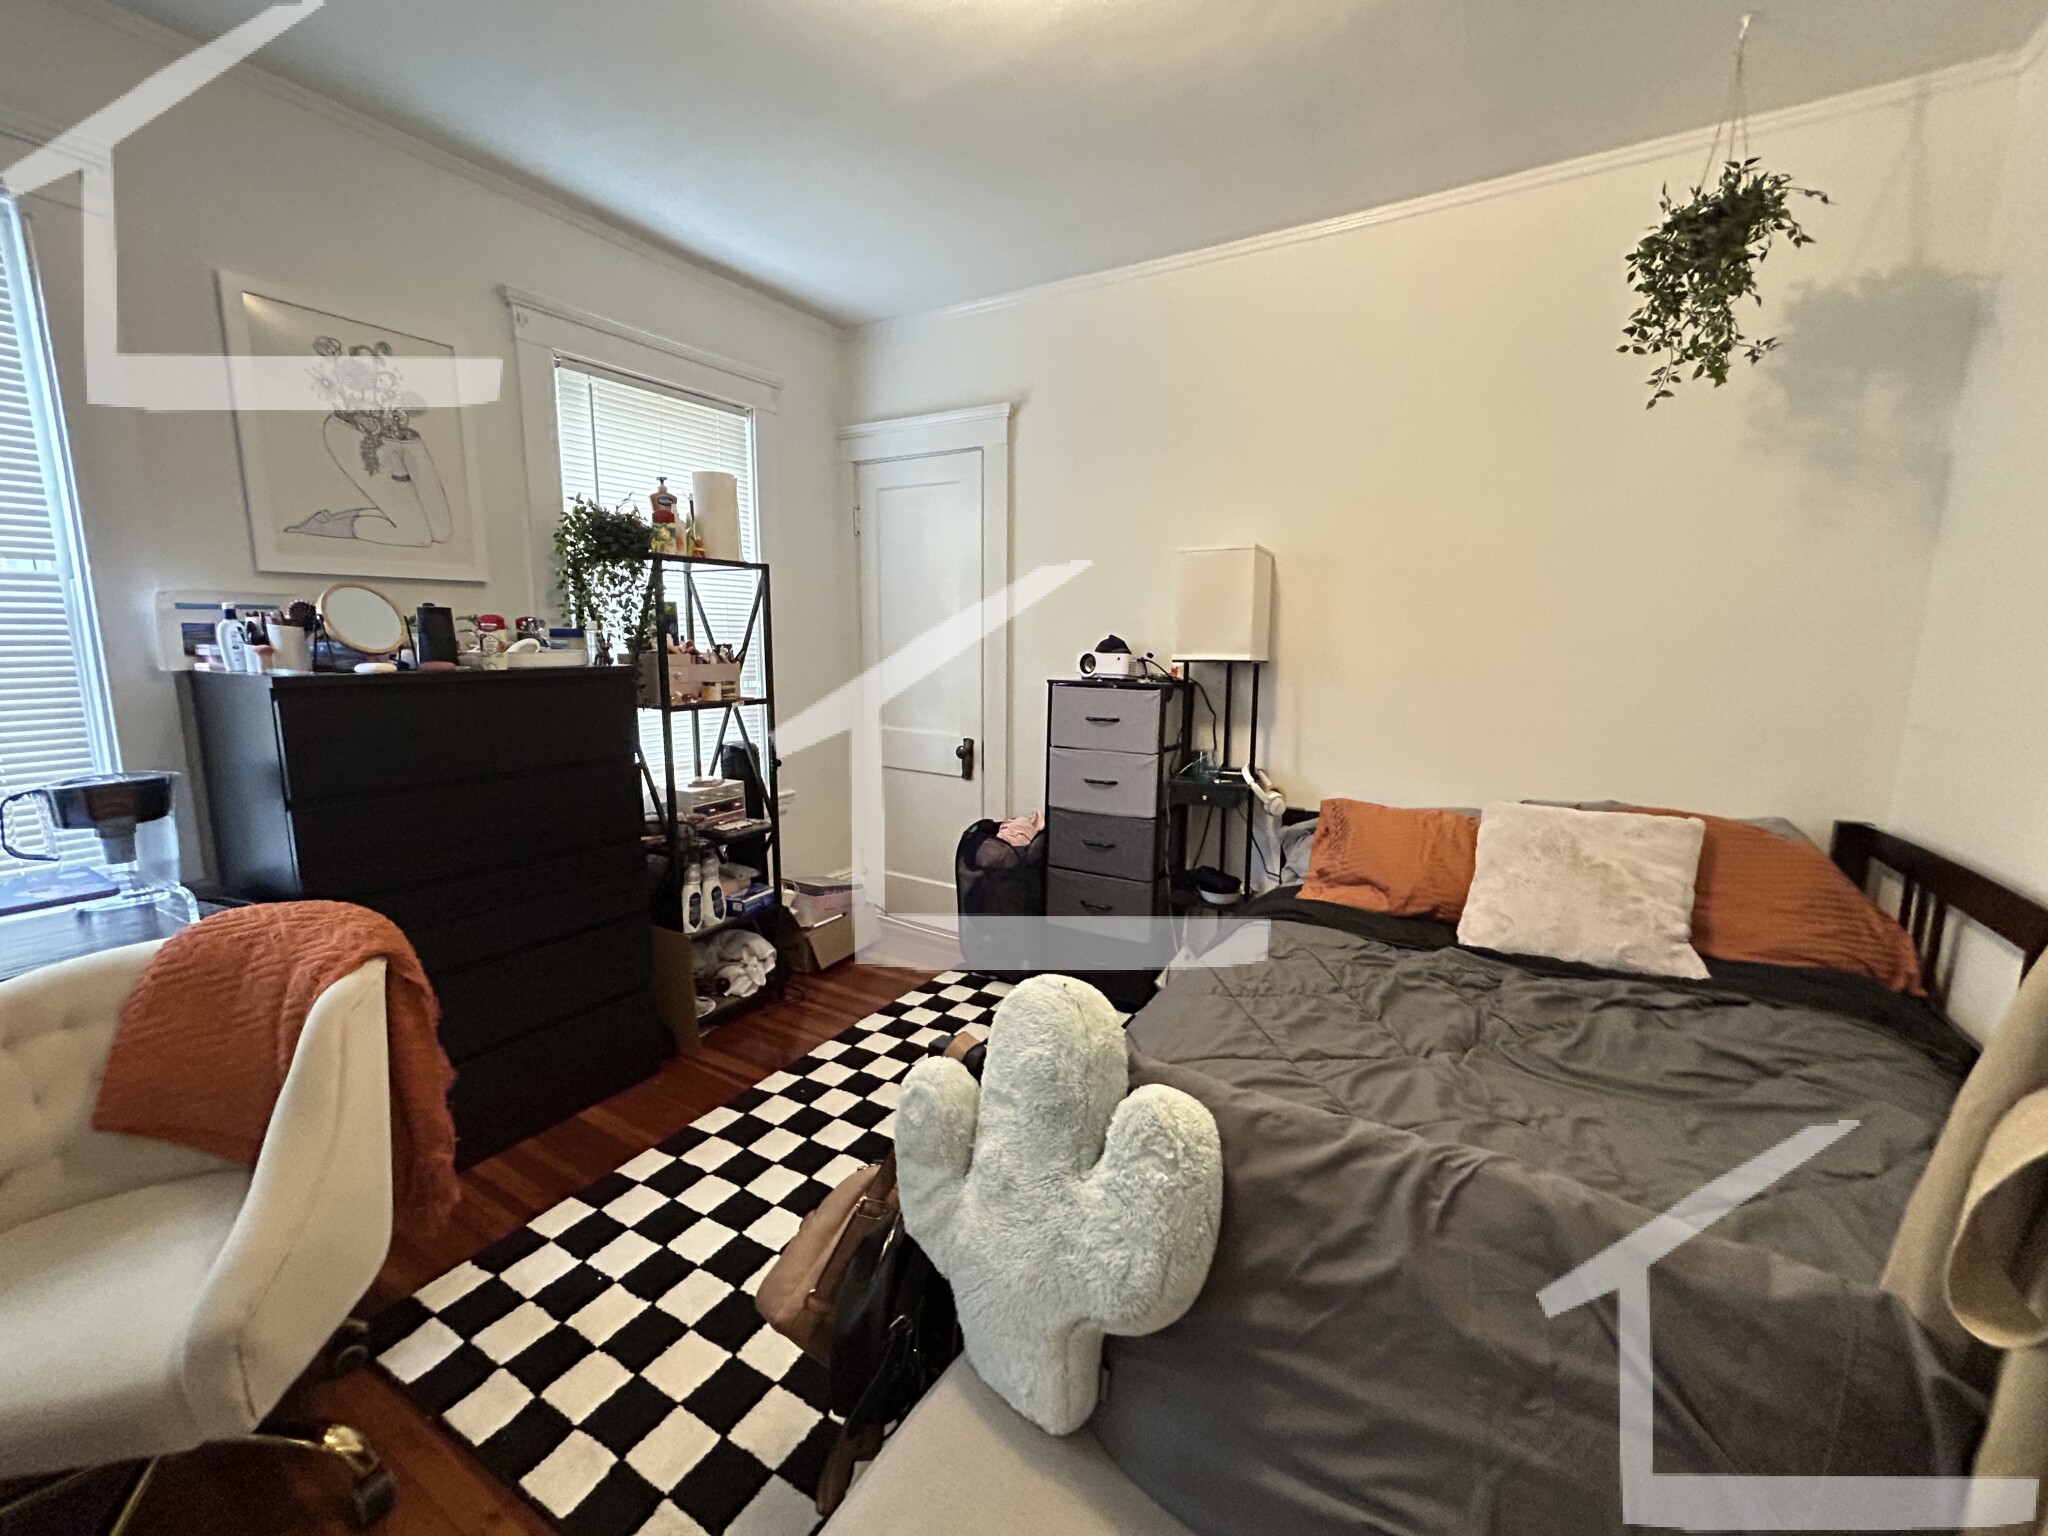 Photos of apartment on Hunnewell Ave.,Boston MA 02135